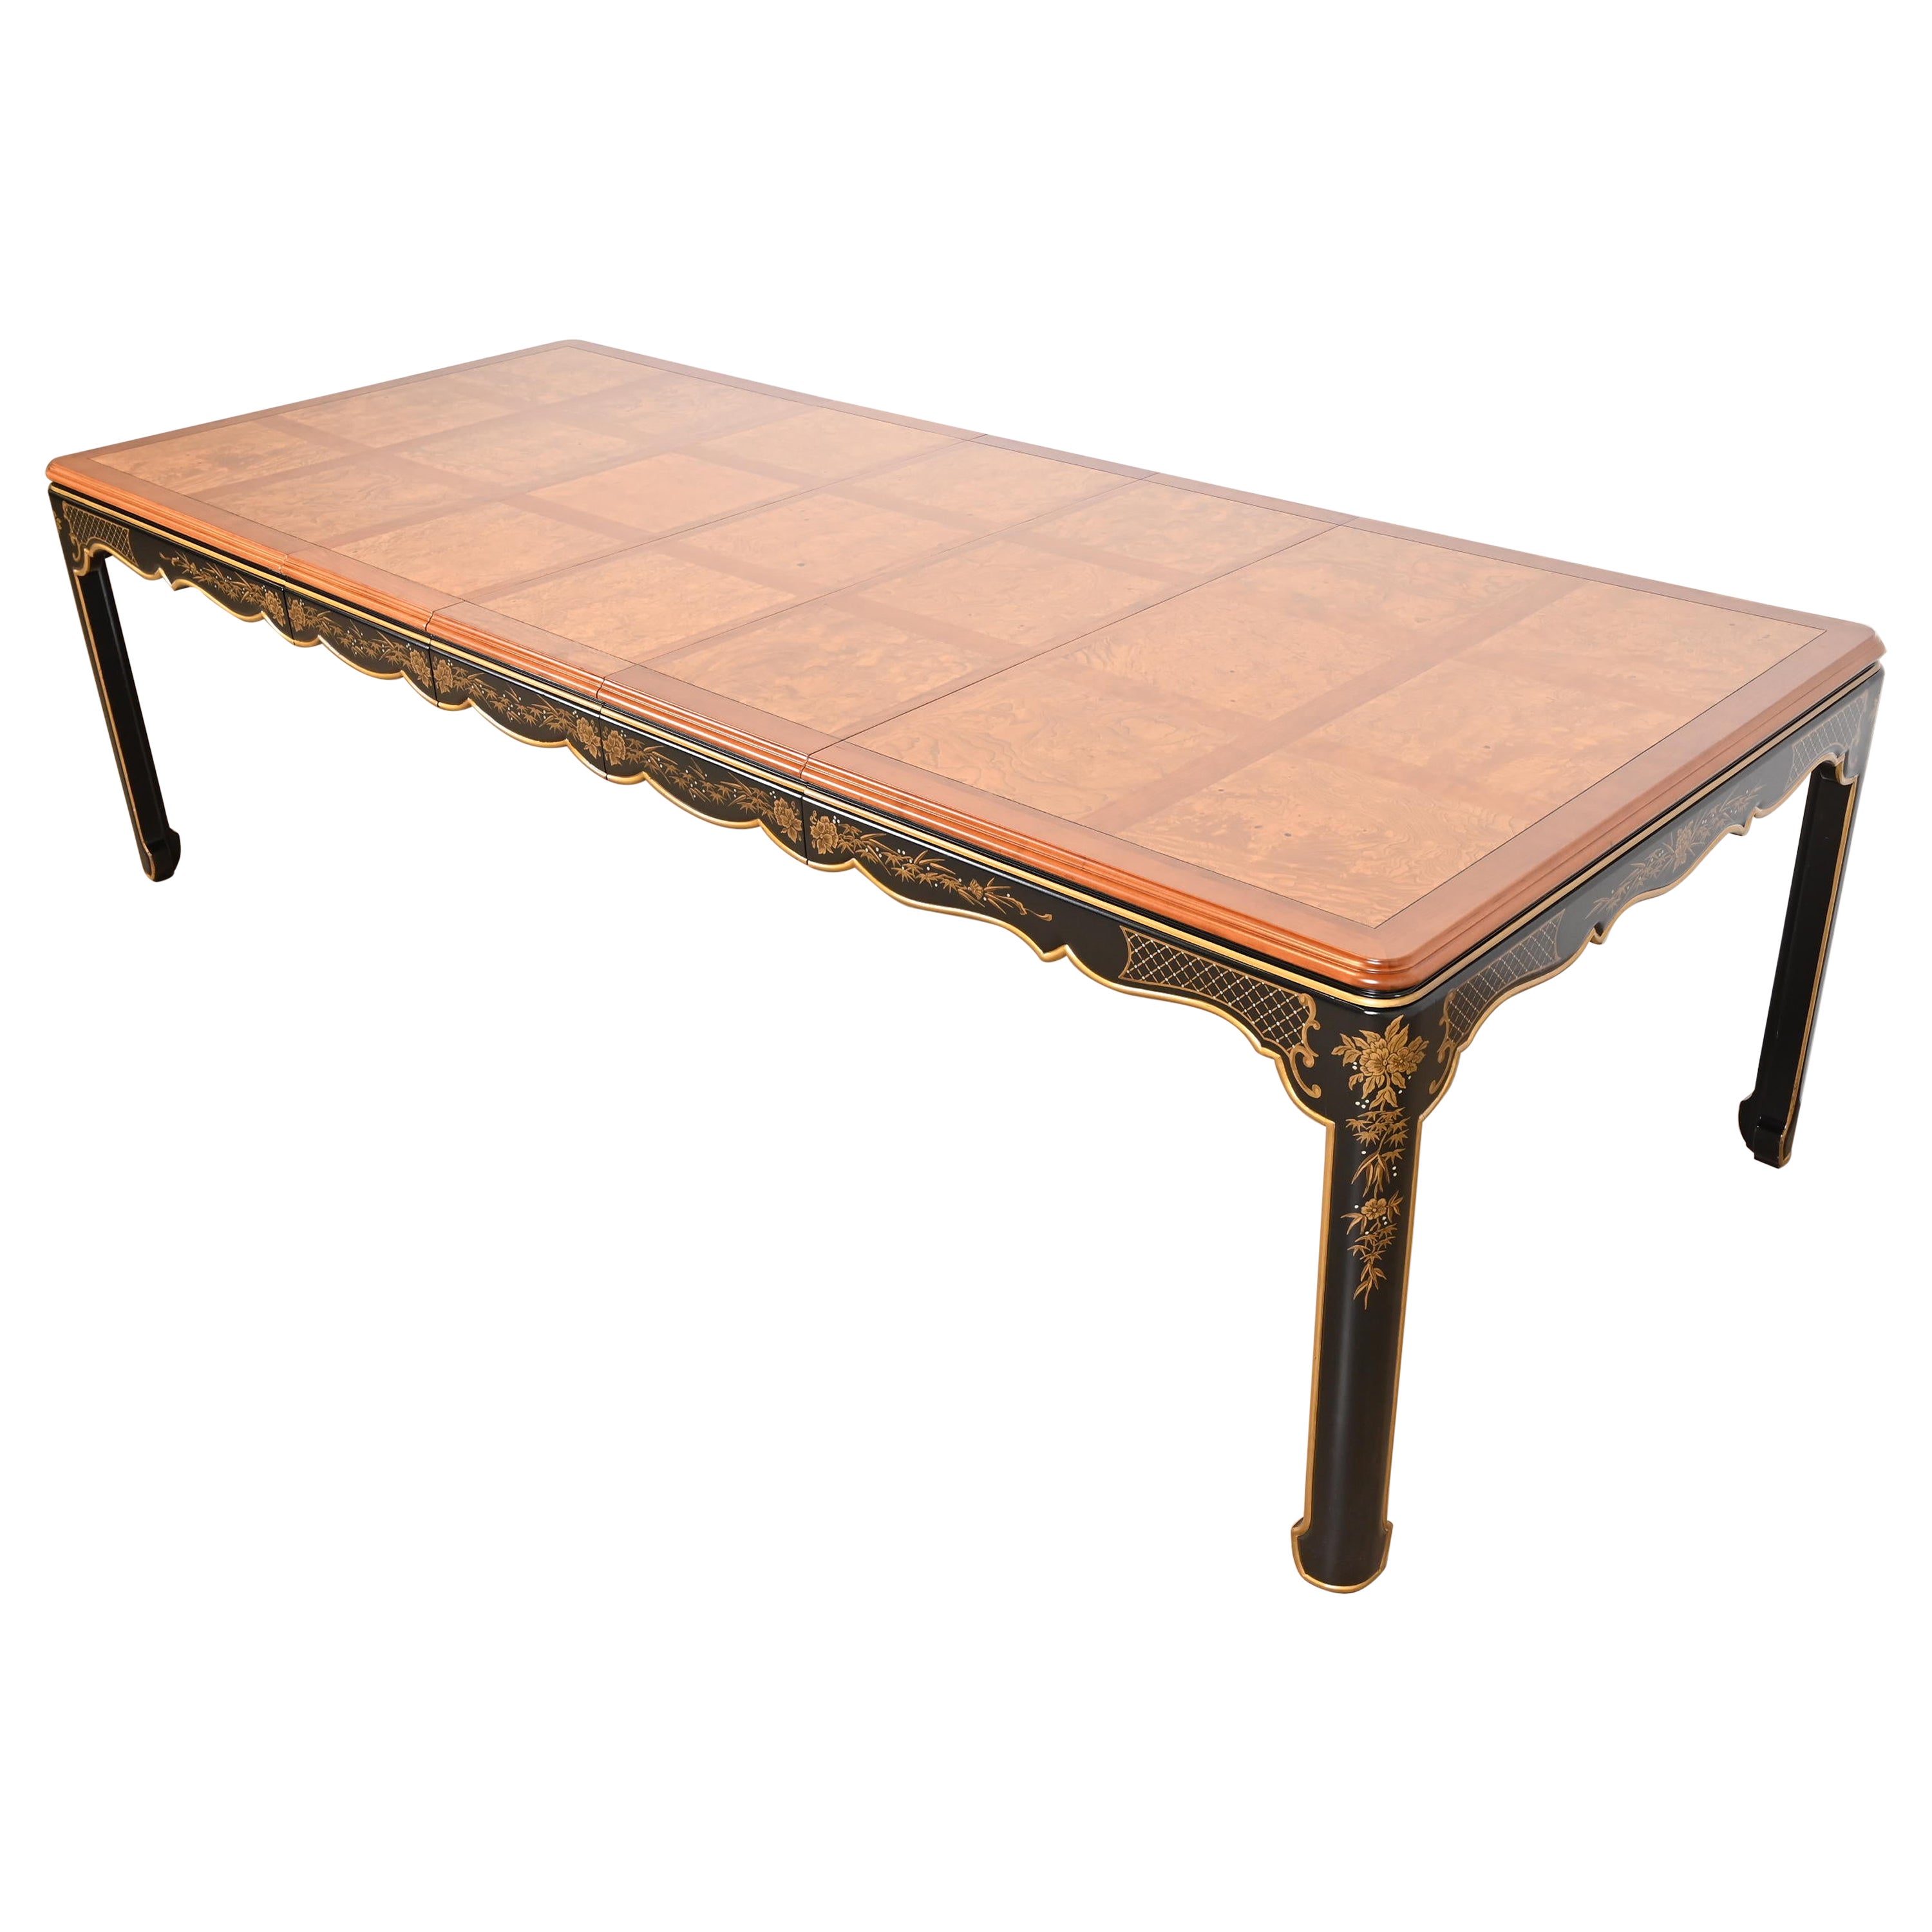 Kindel Furniture Hollywood Regency Chinoiserie Dining Table, Newly Refinished For Sale